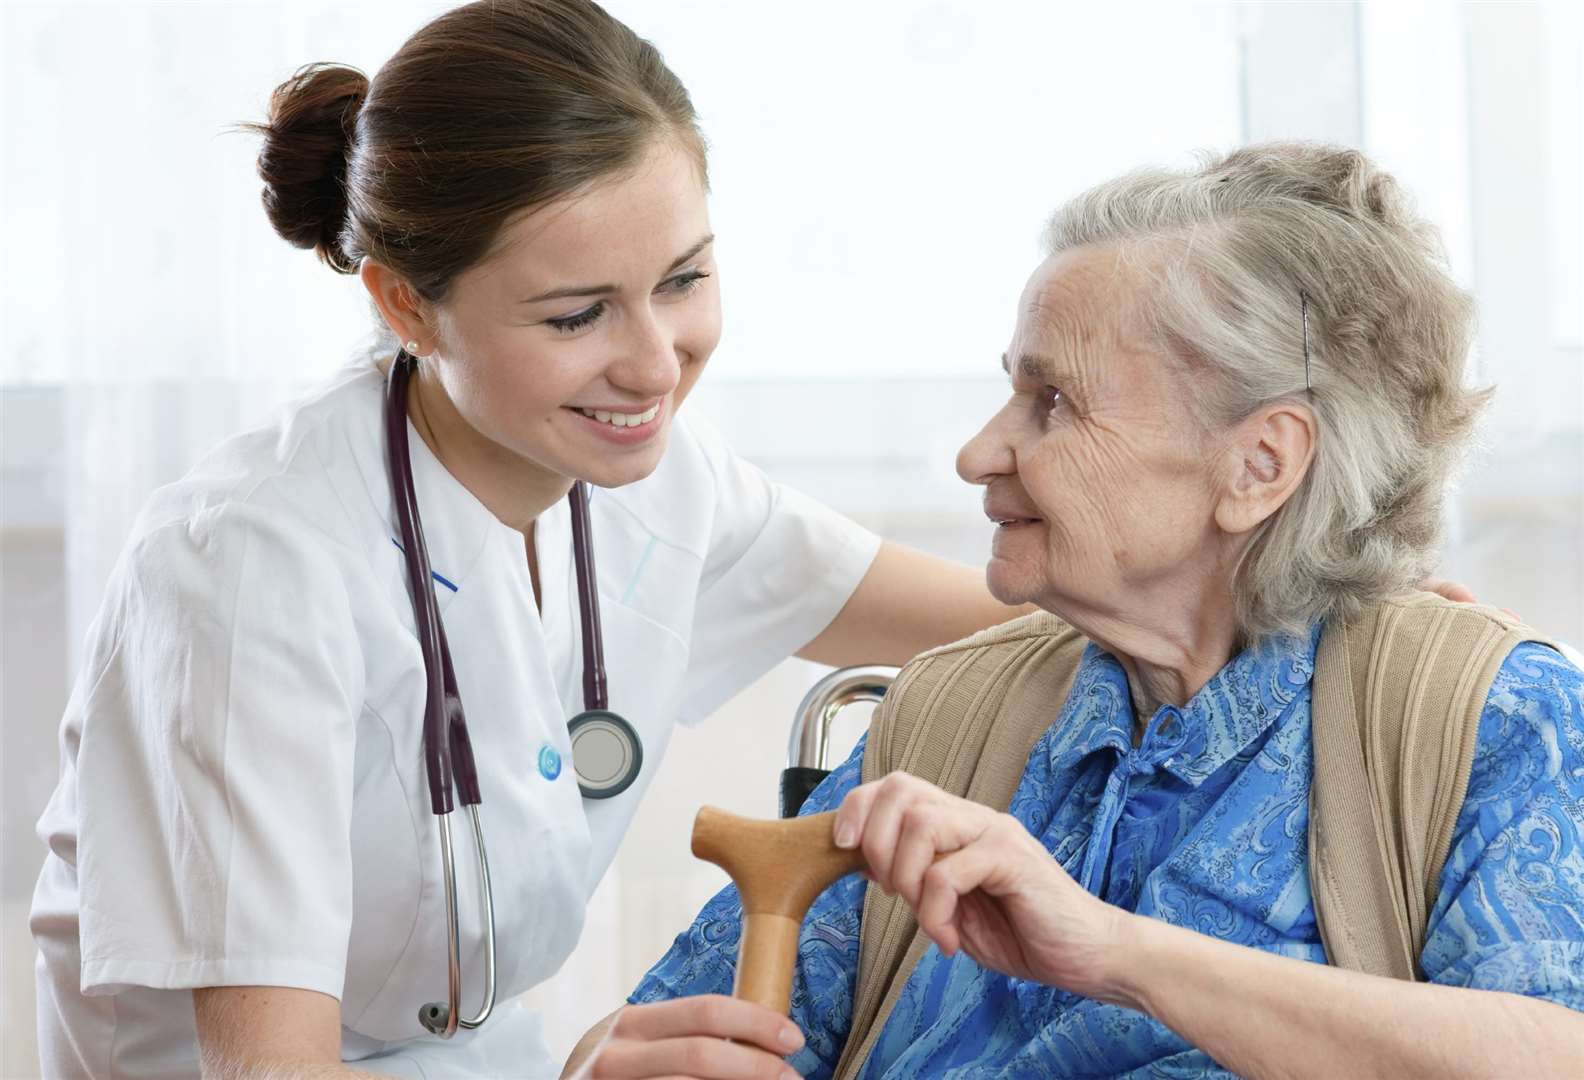 Homecare services have helped relieve pressure on other health services. Photo: iStock.com